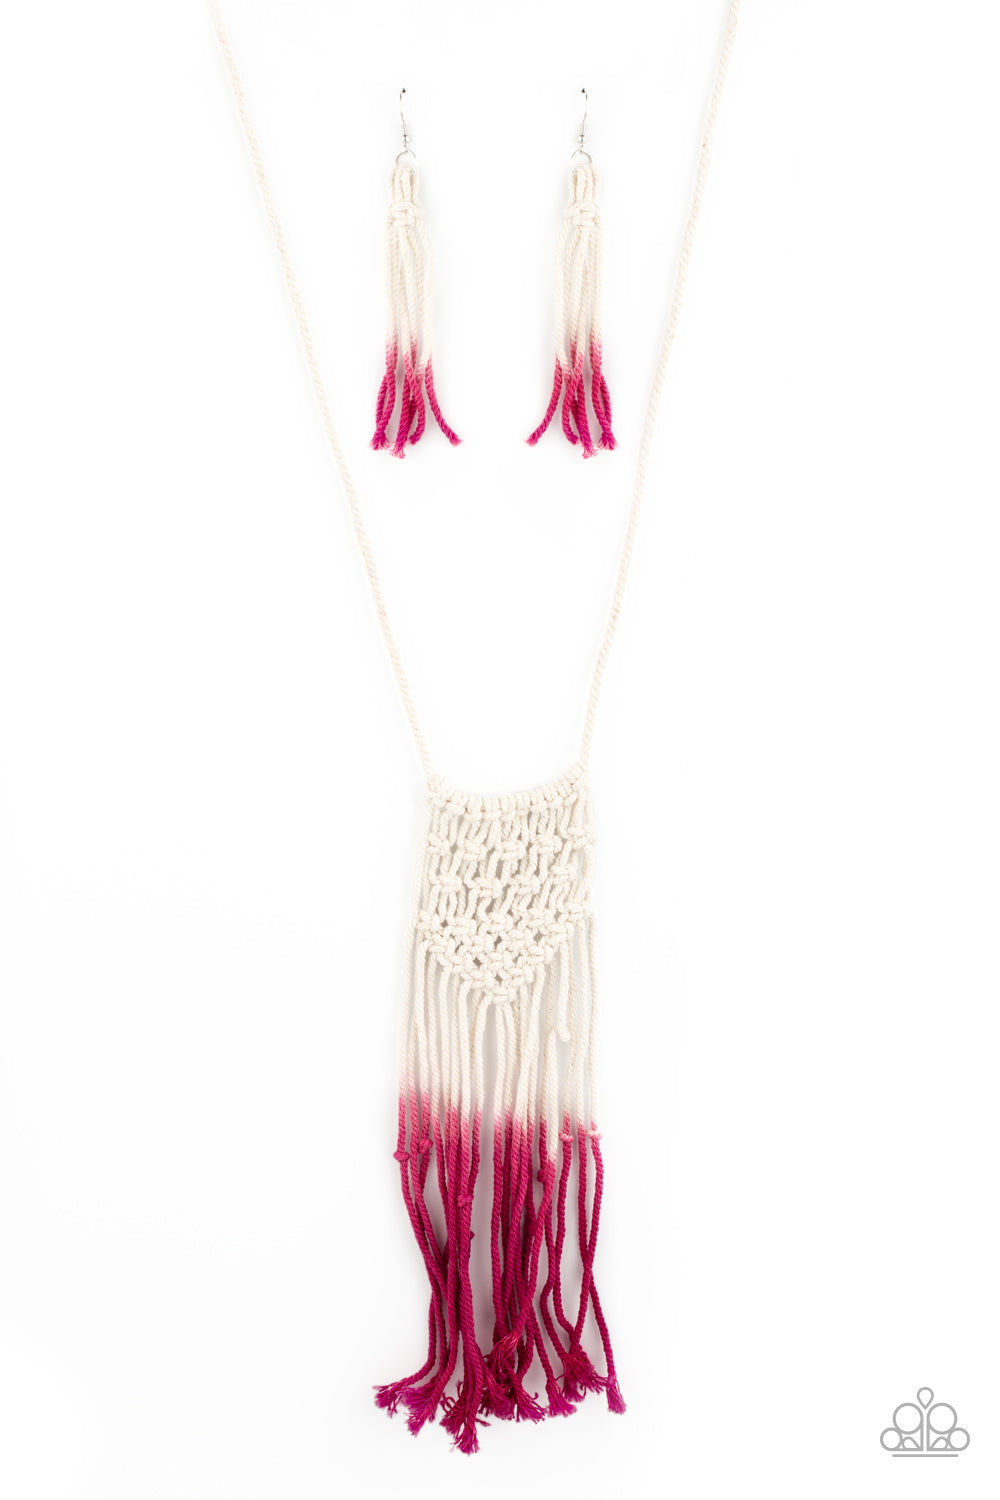 Gradually fading from white to pink, strands of twine-like cording delicately knot and braid into a decorative macramé inspired pendant across the chest. Features an adjustable sliding knot closure.Gradually fading from white to pink, strands of twine-like cording delicately knot and braid into a decorative macramé inspired pendant across the chest. Features an adjustable sliding knot closure.